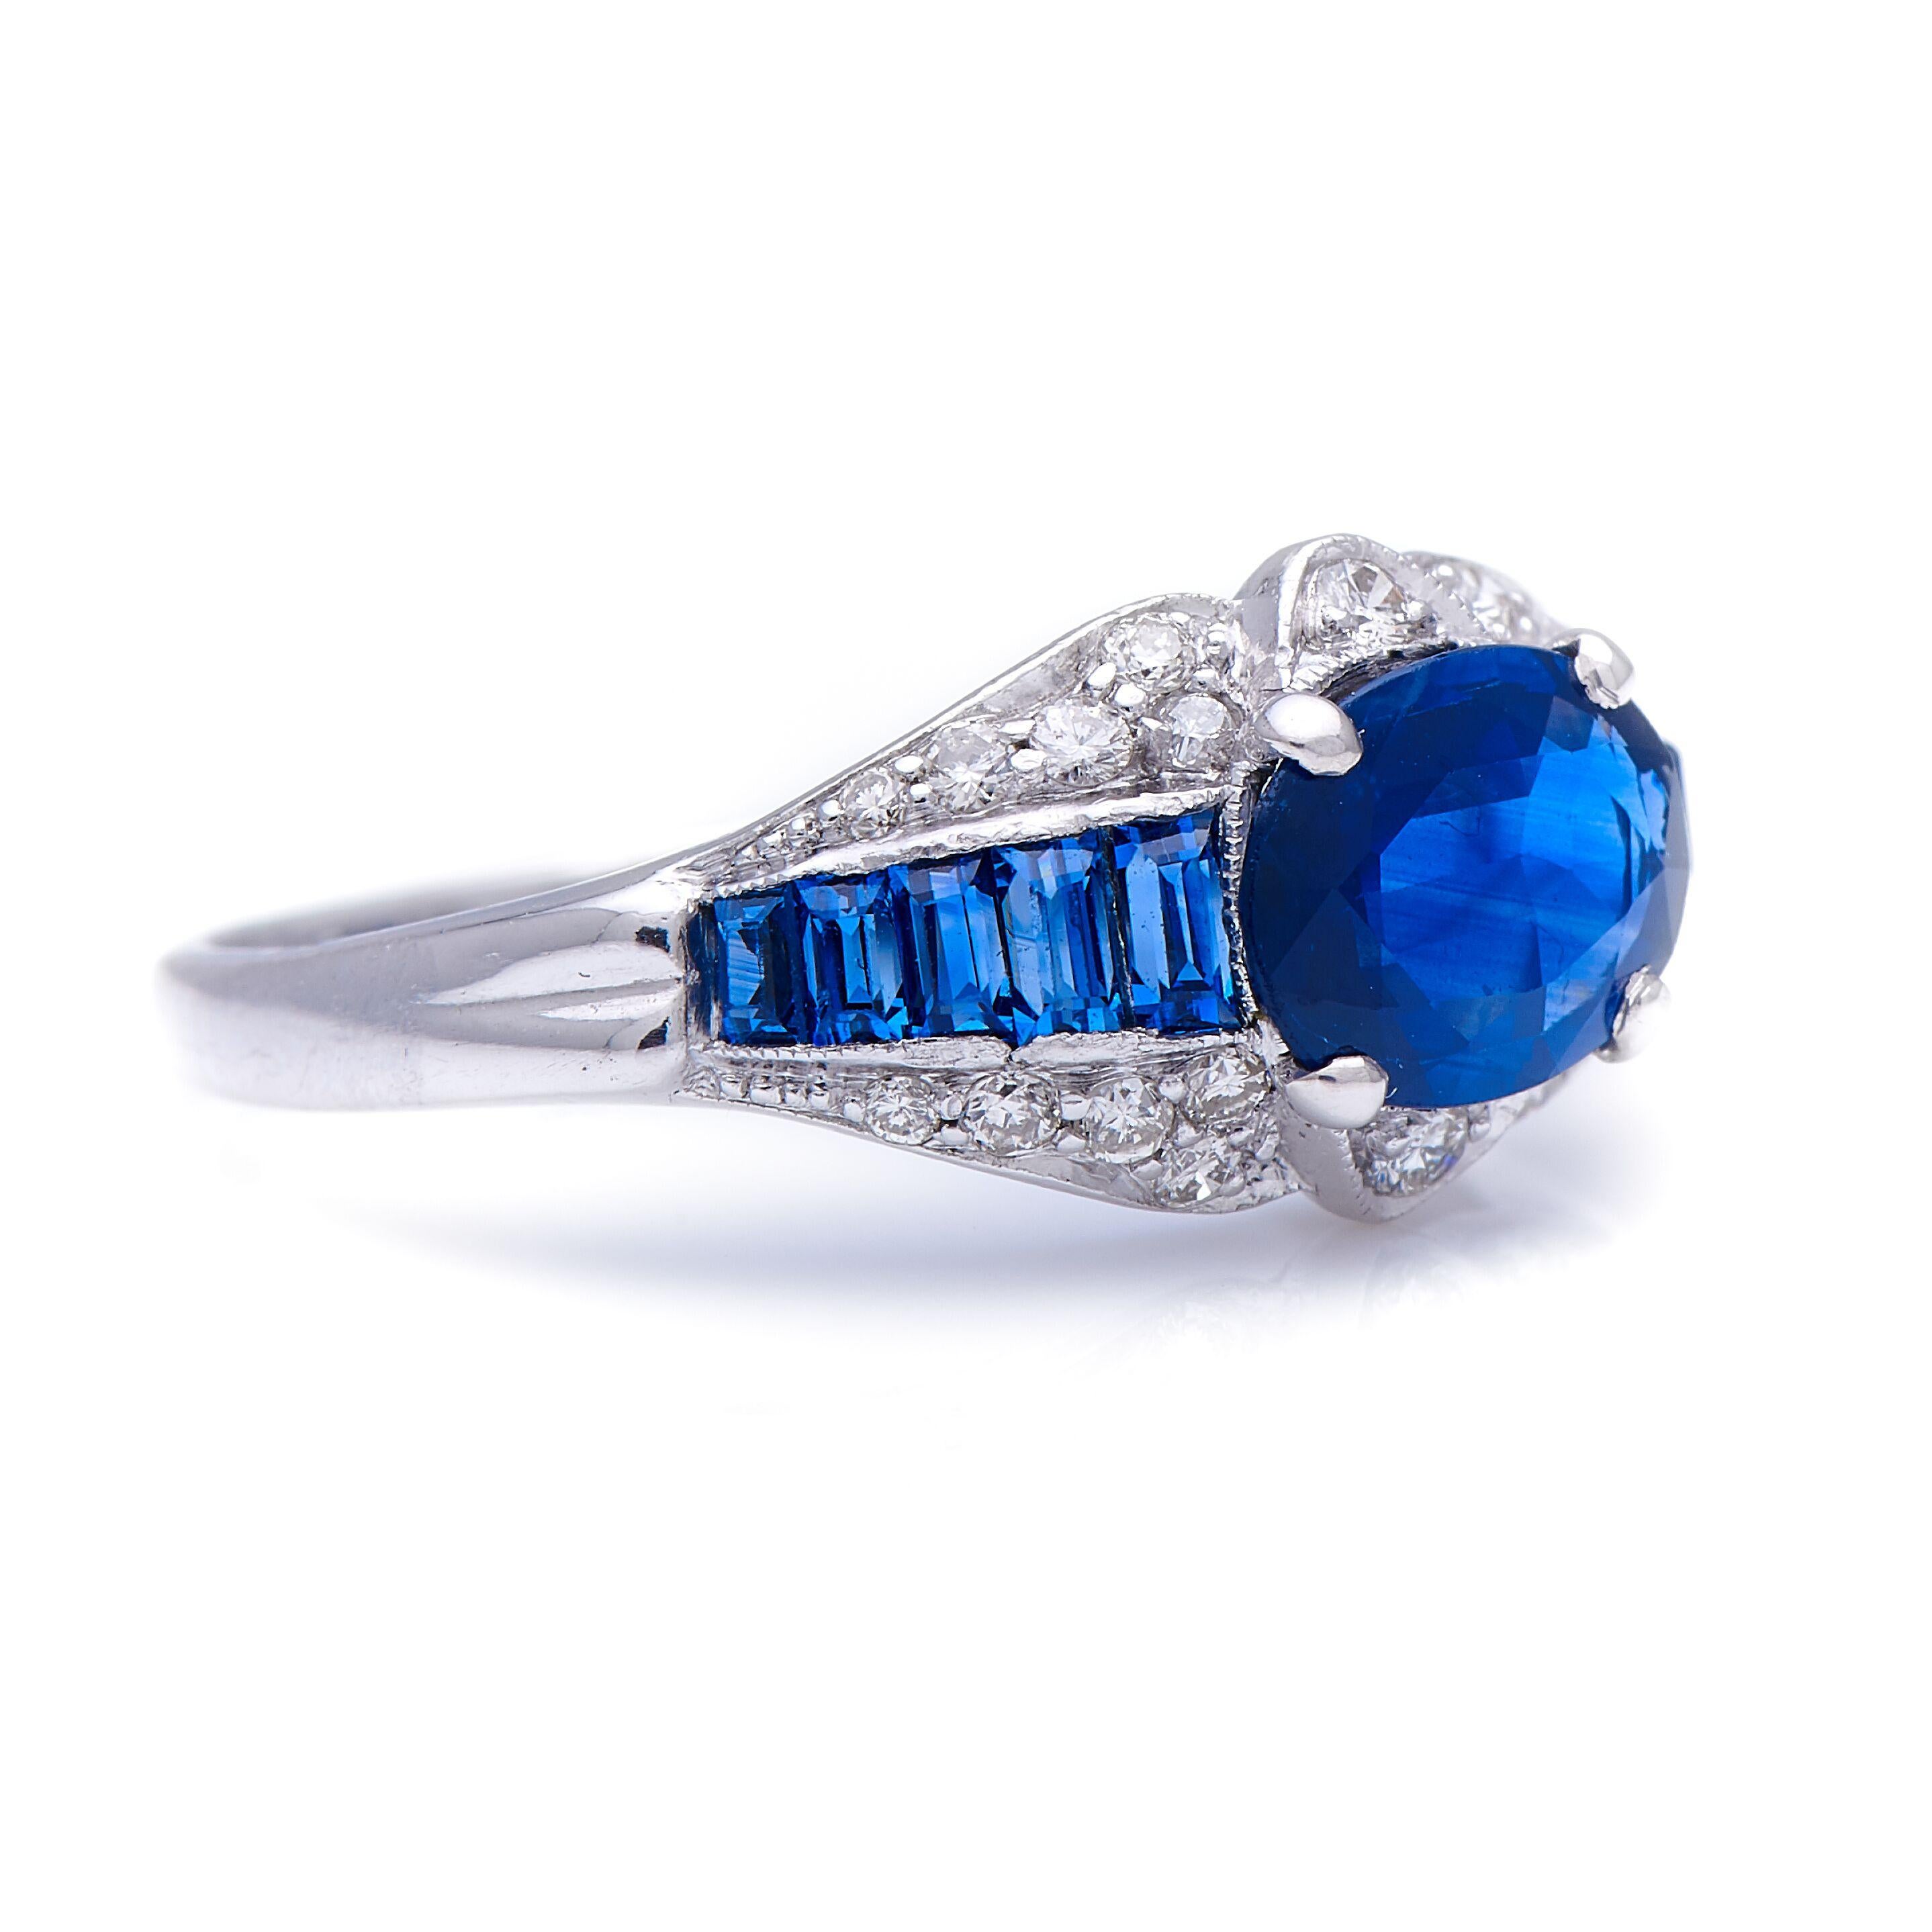 Sapphire and diamond ring, 20thcentury. The clever setting of this ring takes a central oval sapphire and several smaller calibré-cut sapphires and seamlessly fuses them together into a continuous band of blue. The millgrained diamond-set edges